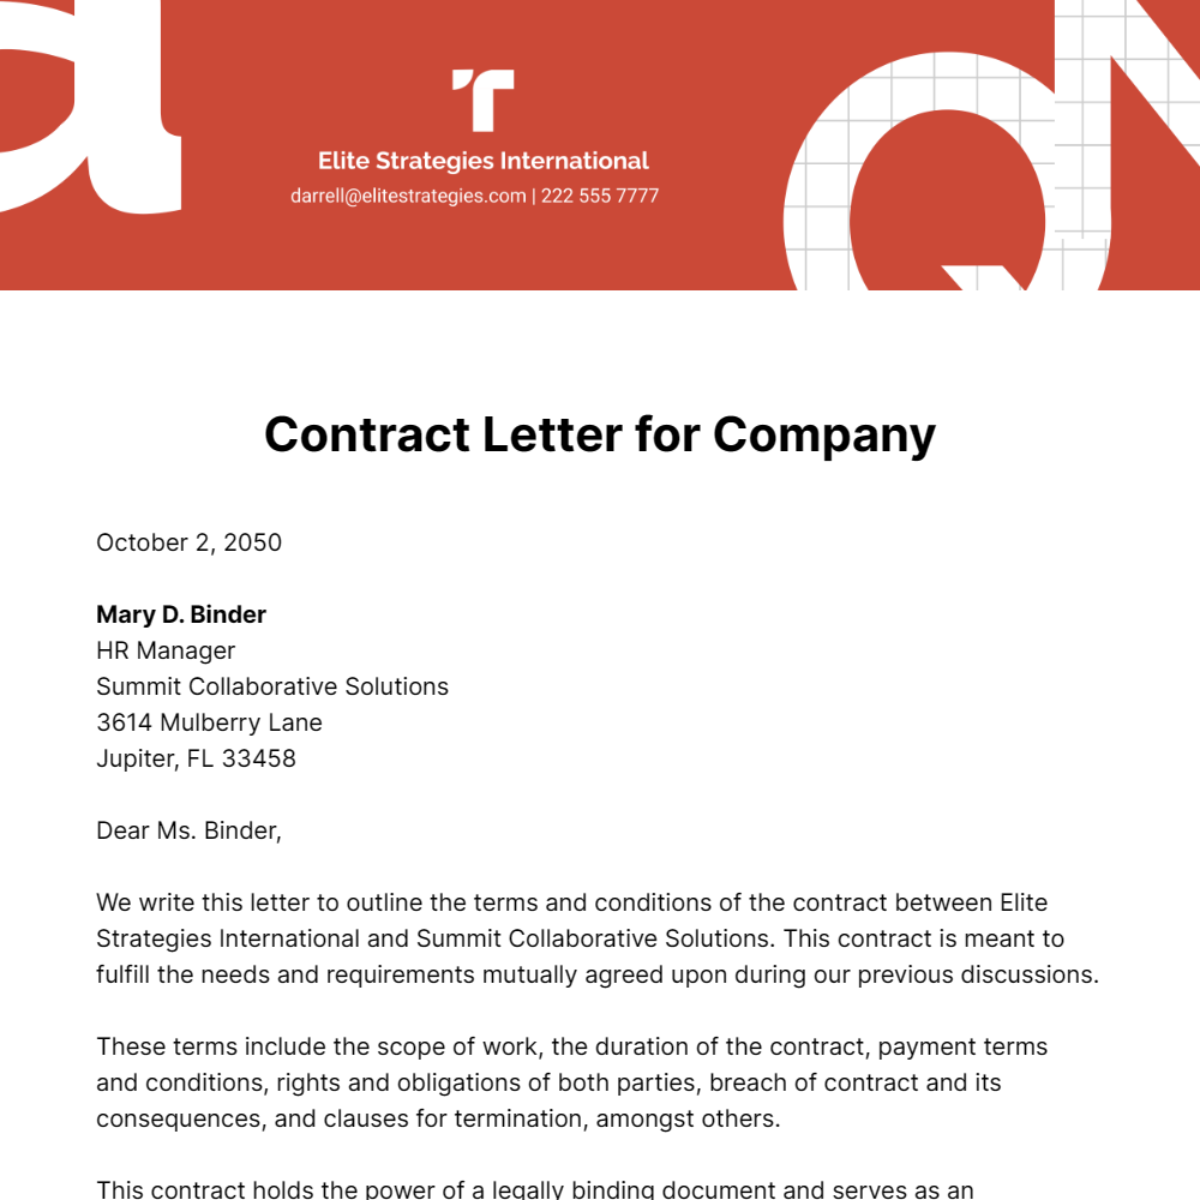 Contract Letter for Company Template